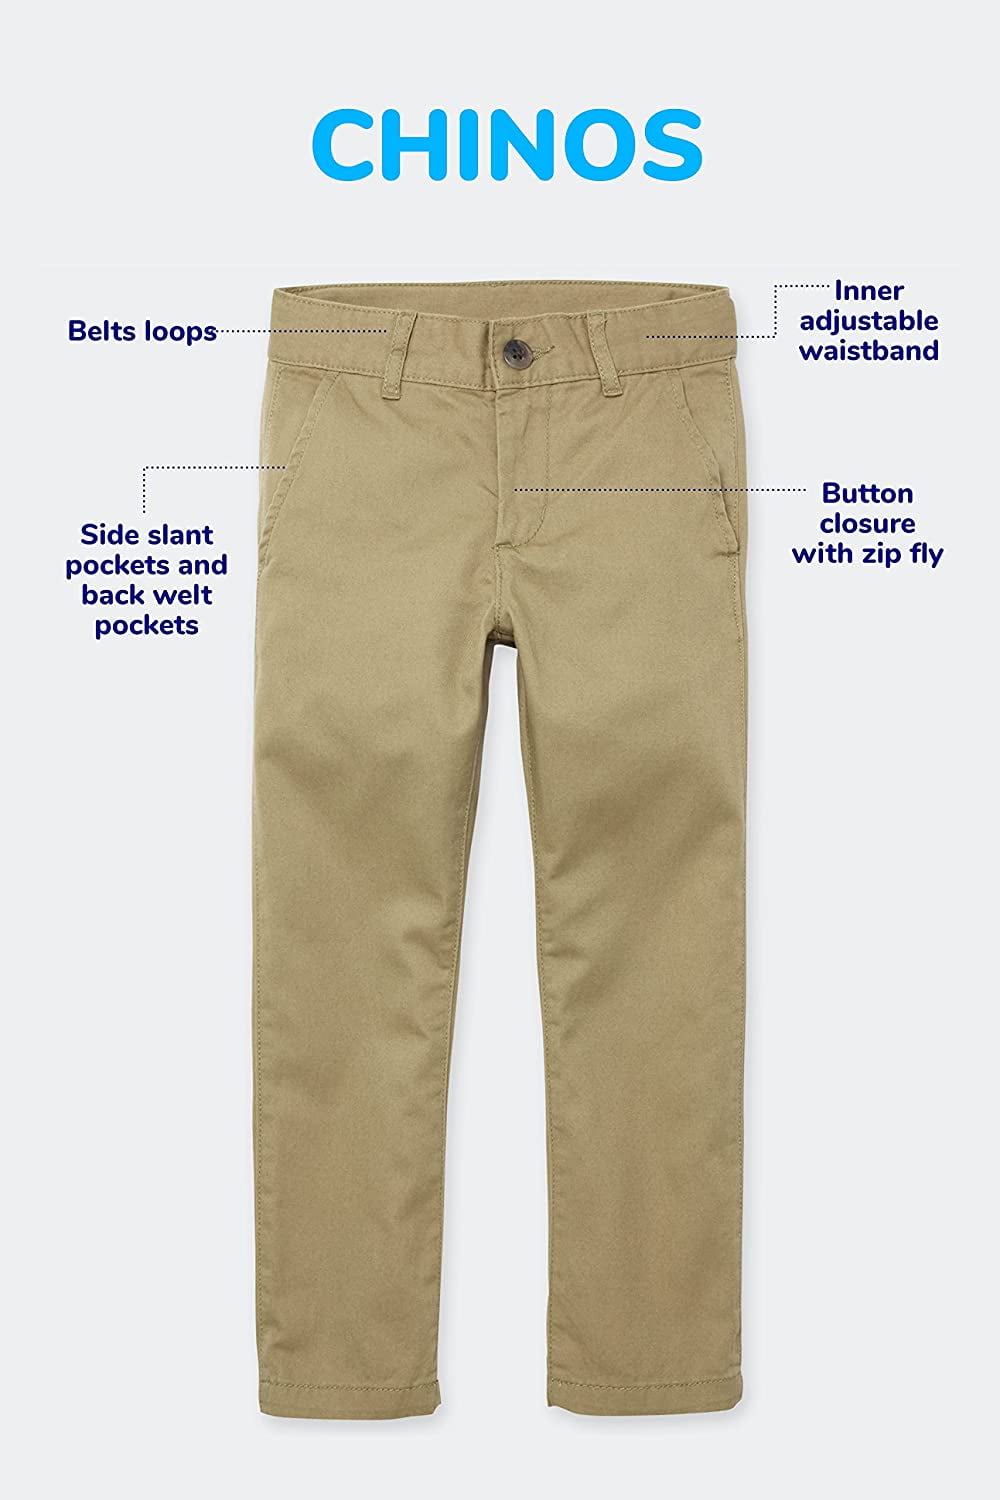 The Children's Place Boys 2-Pack Stretch Chino Woven Bottoms, Sizes 4-16 